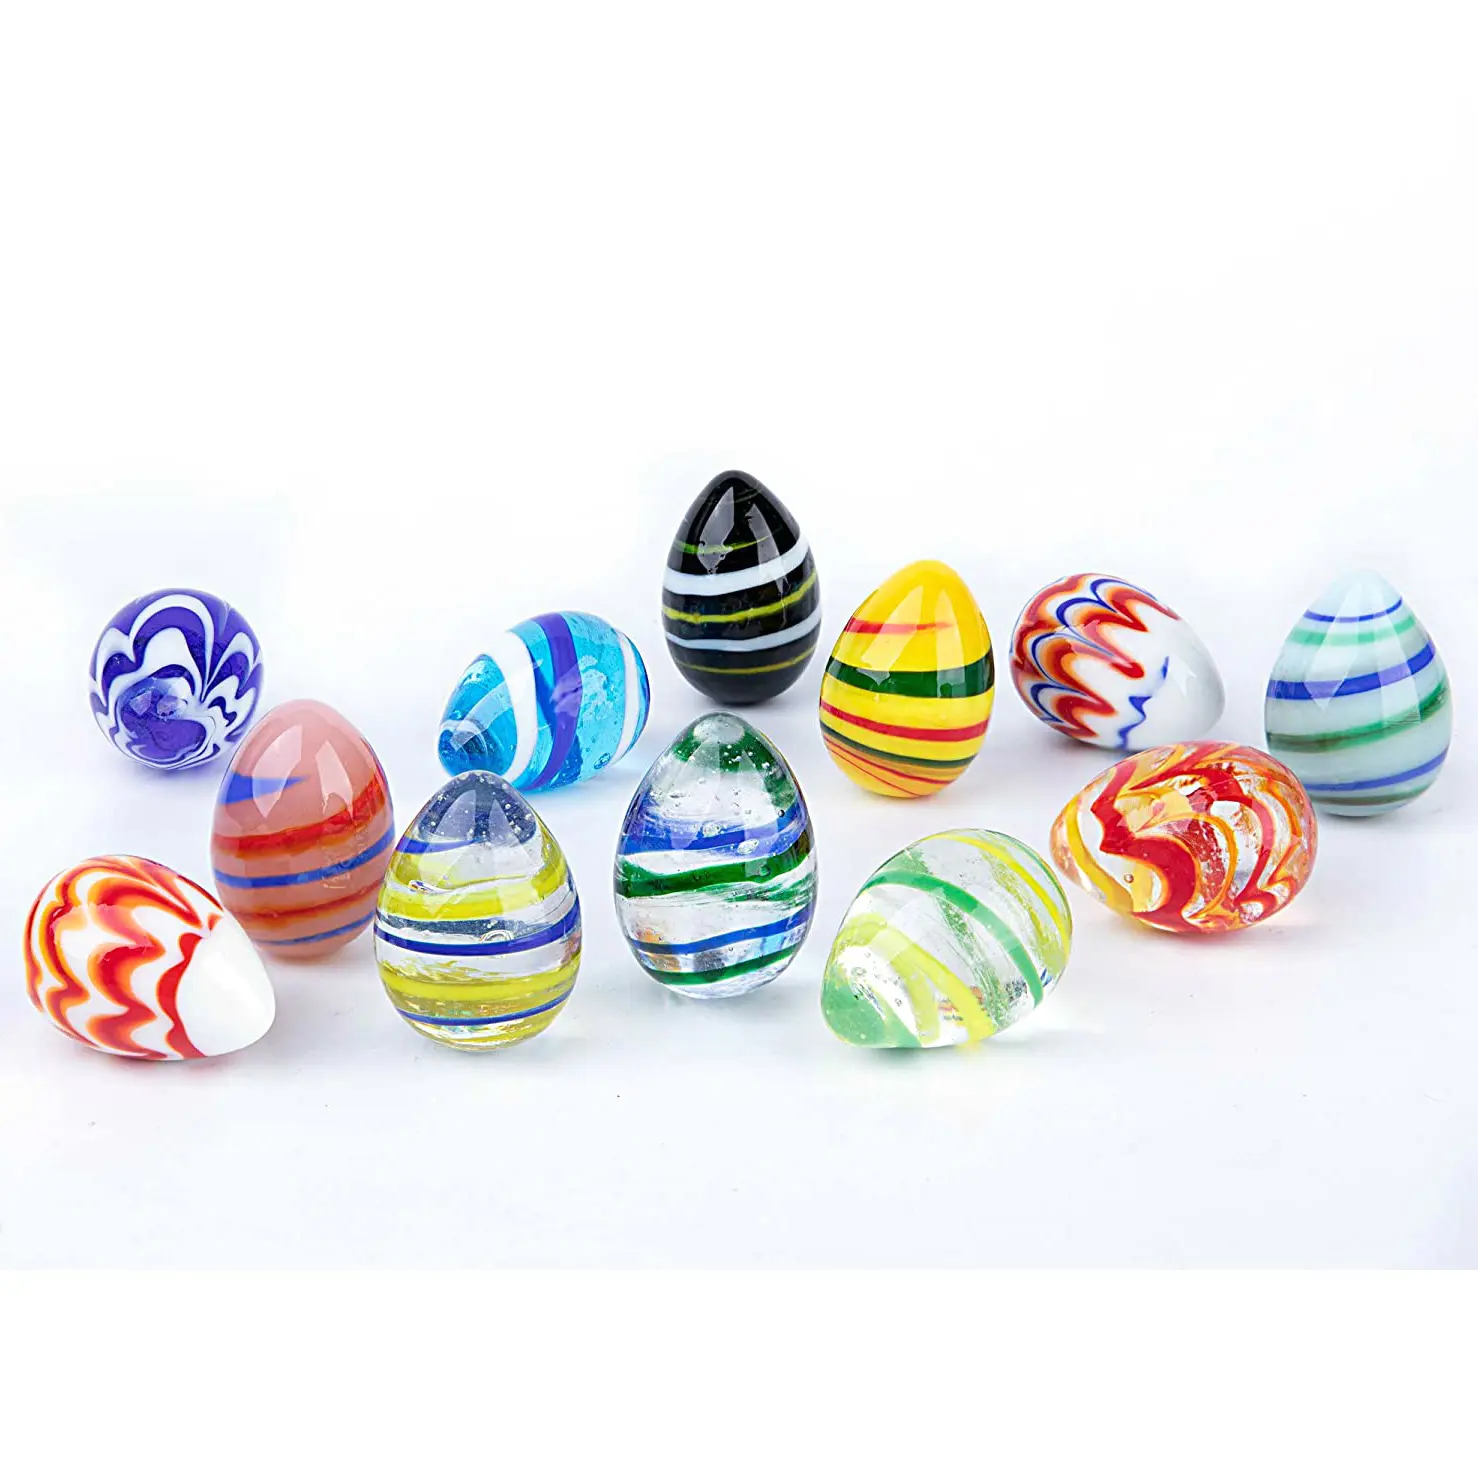 Crystal Eggs Easter Eggs Handmade Tiny Eggs Decorative Home Decoration Collectible Figurine Eco-friendly